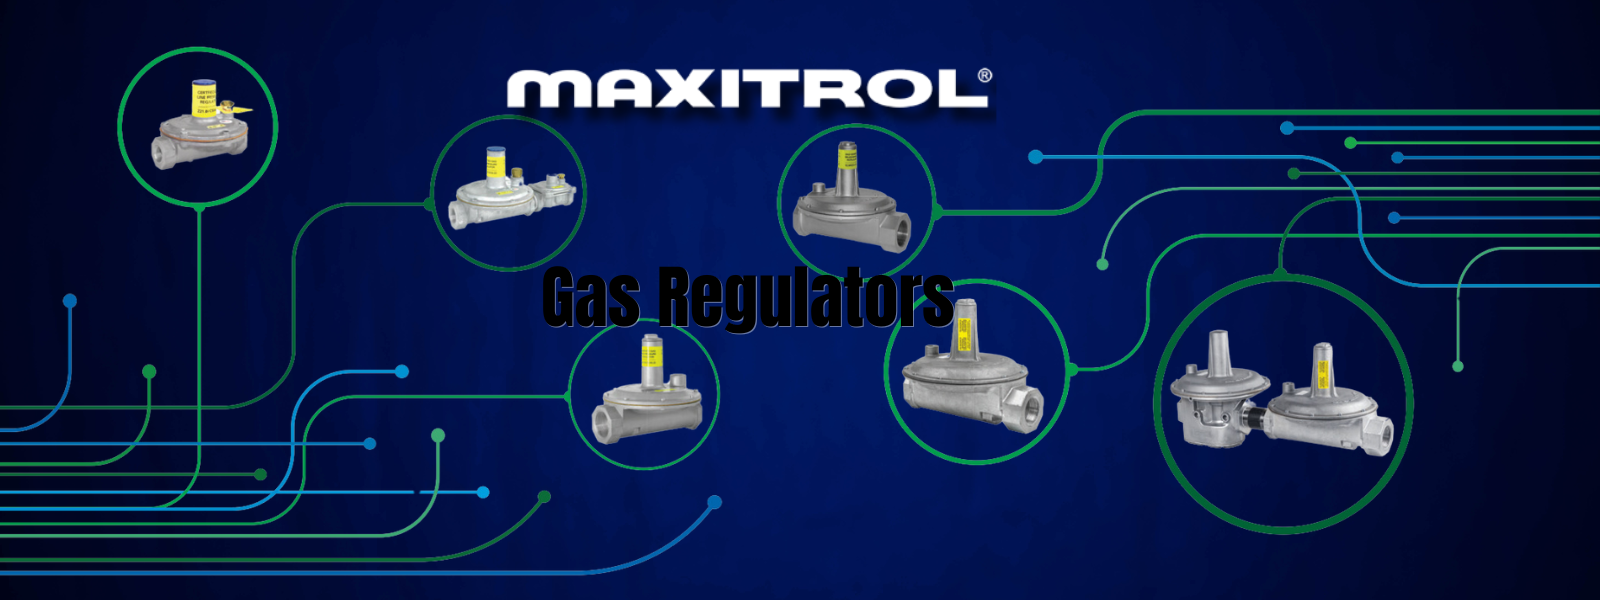 How to know which Gas Regulator to use?